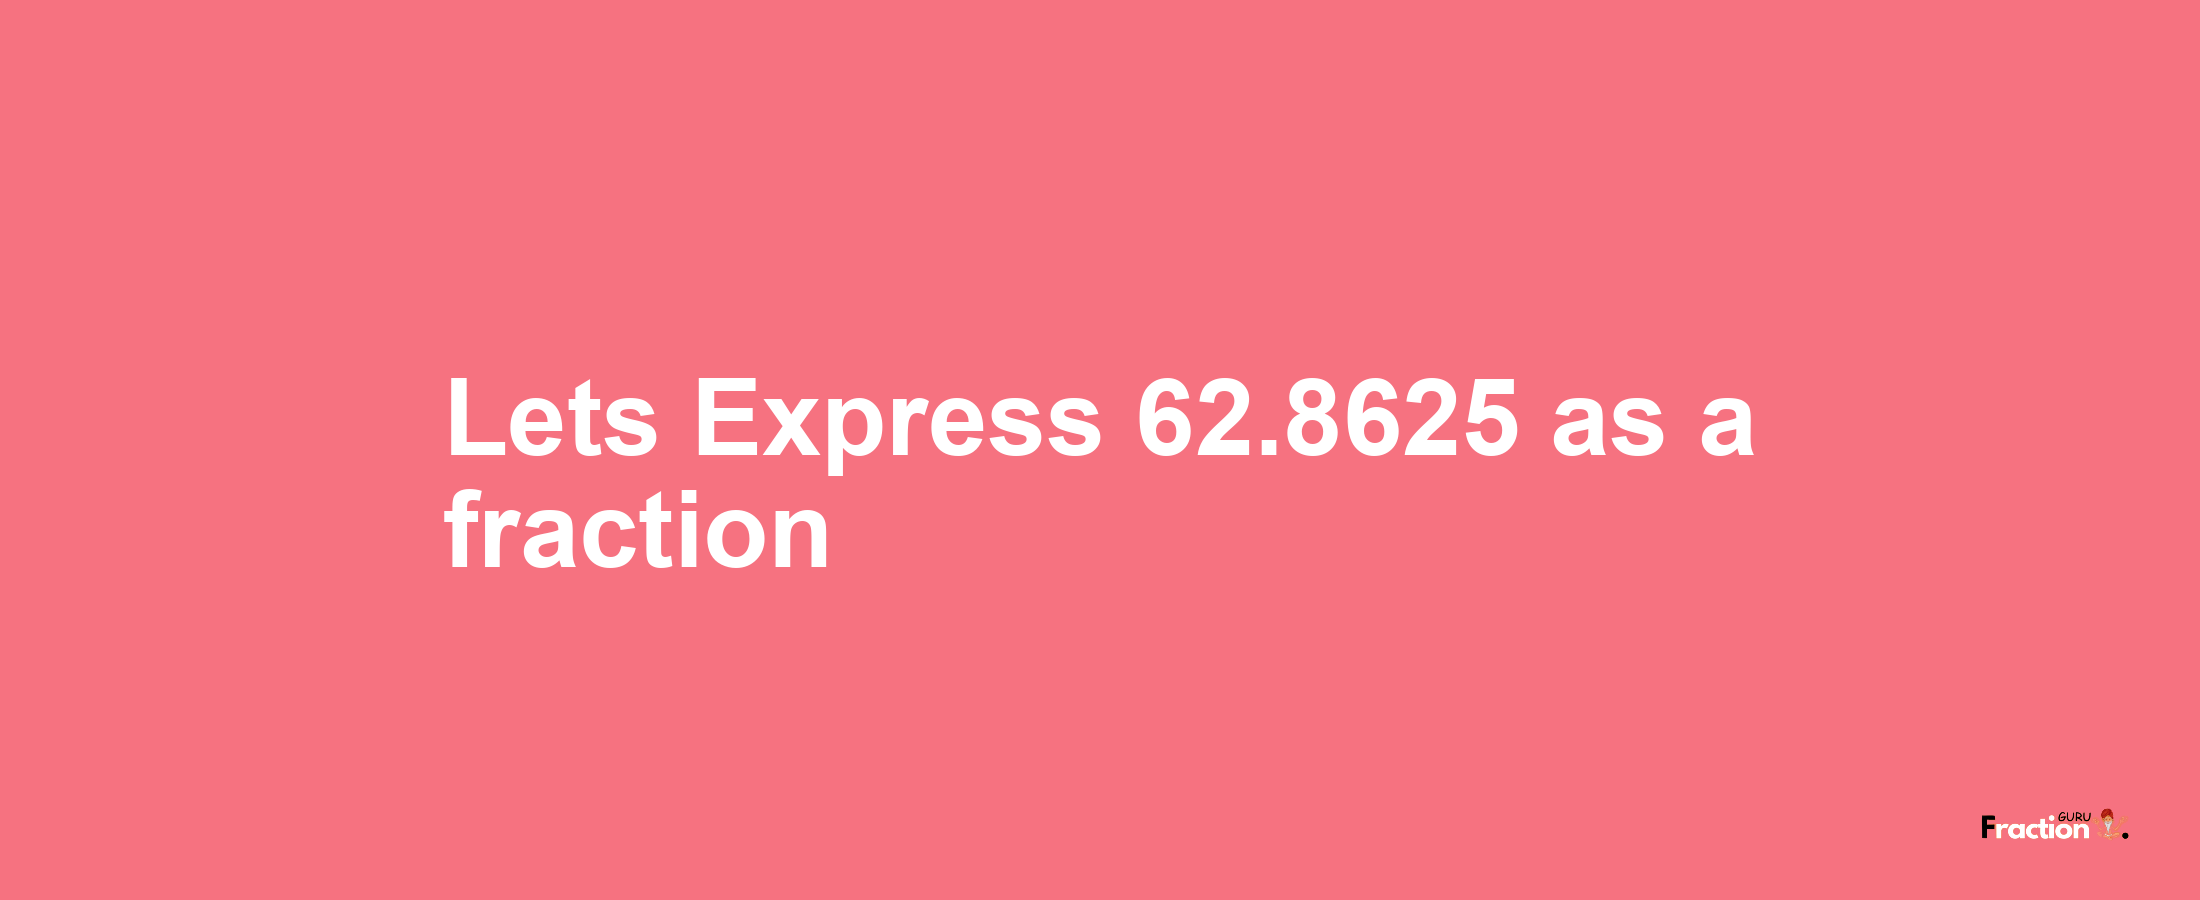 Lets Express 62.8625 as afraction